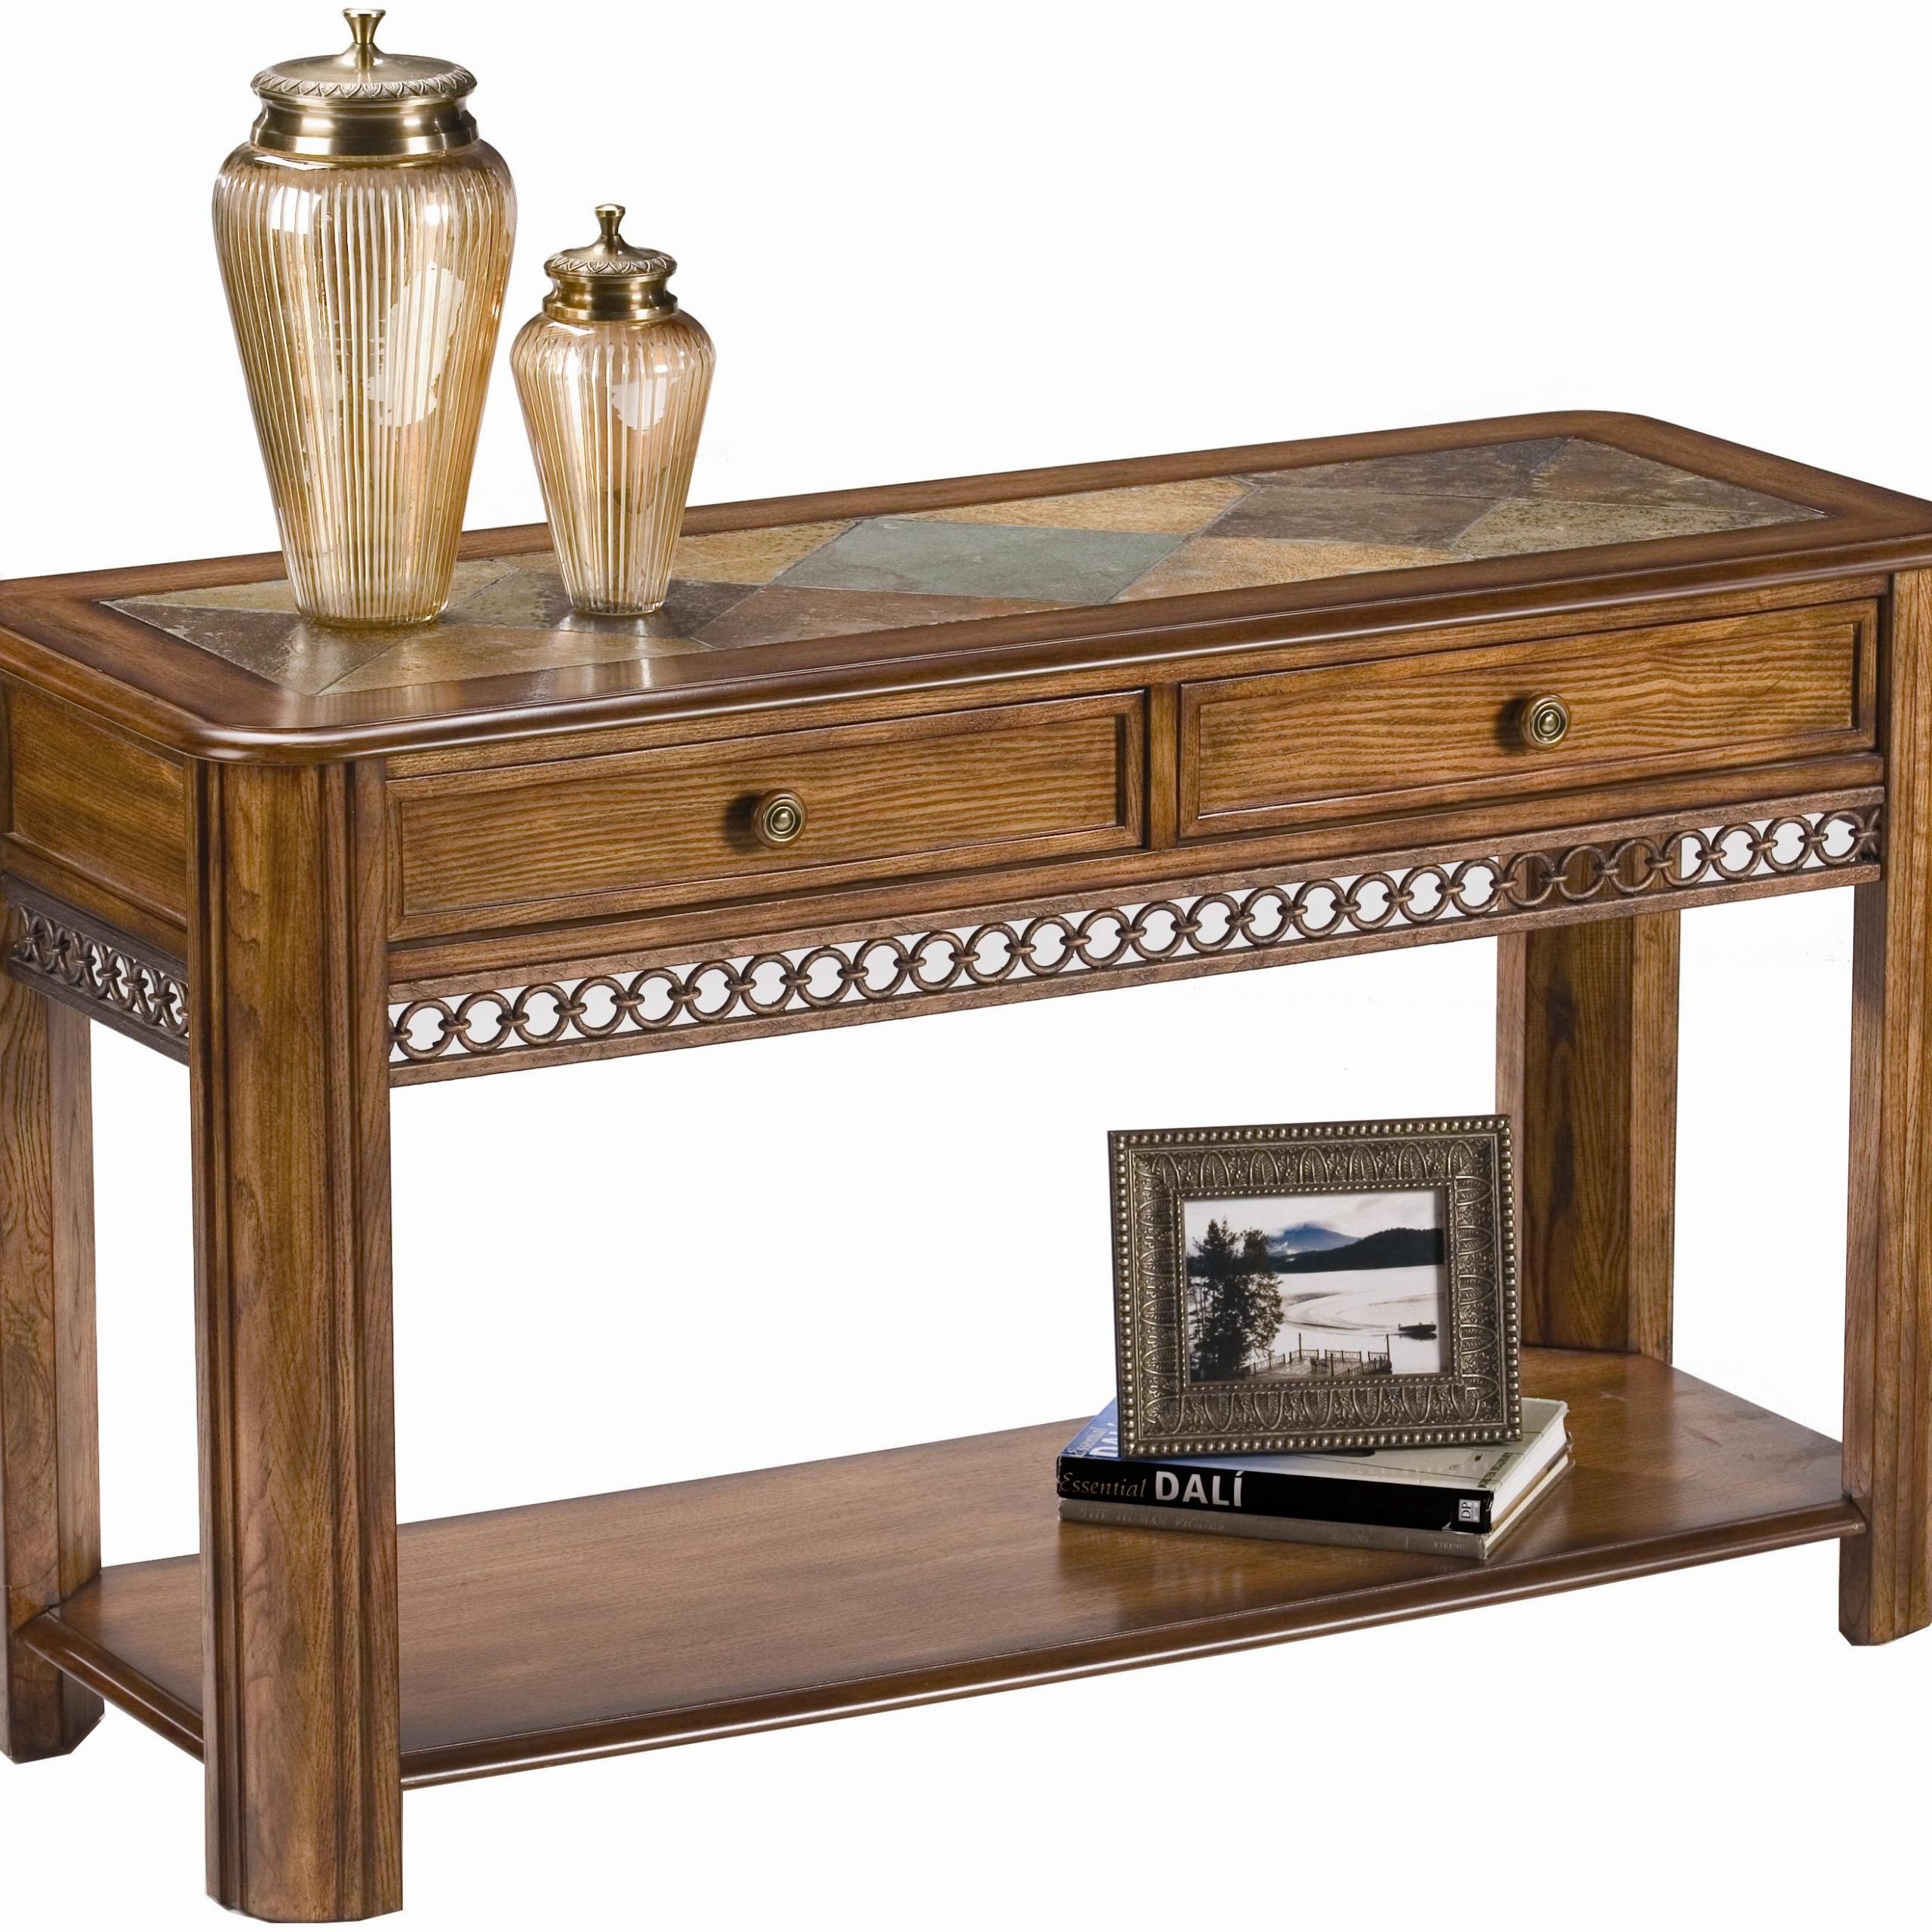 Rectangular Sofa Tablemagnussen Home | Wood Sofa Table, Sofa Table With Regard To Wood Rectangular Console Tables (View 1 of 20)